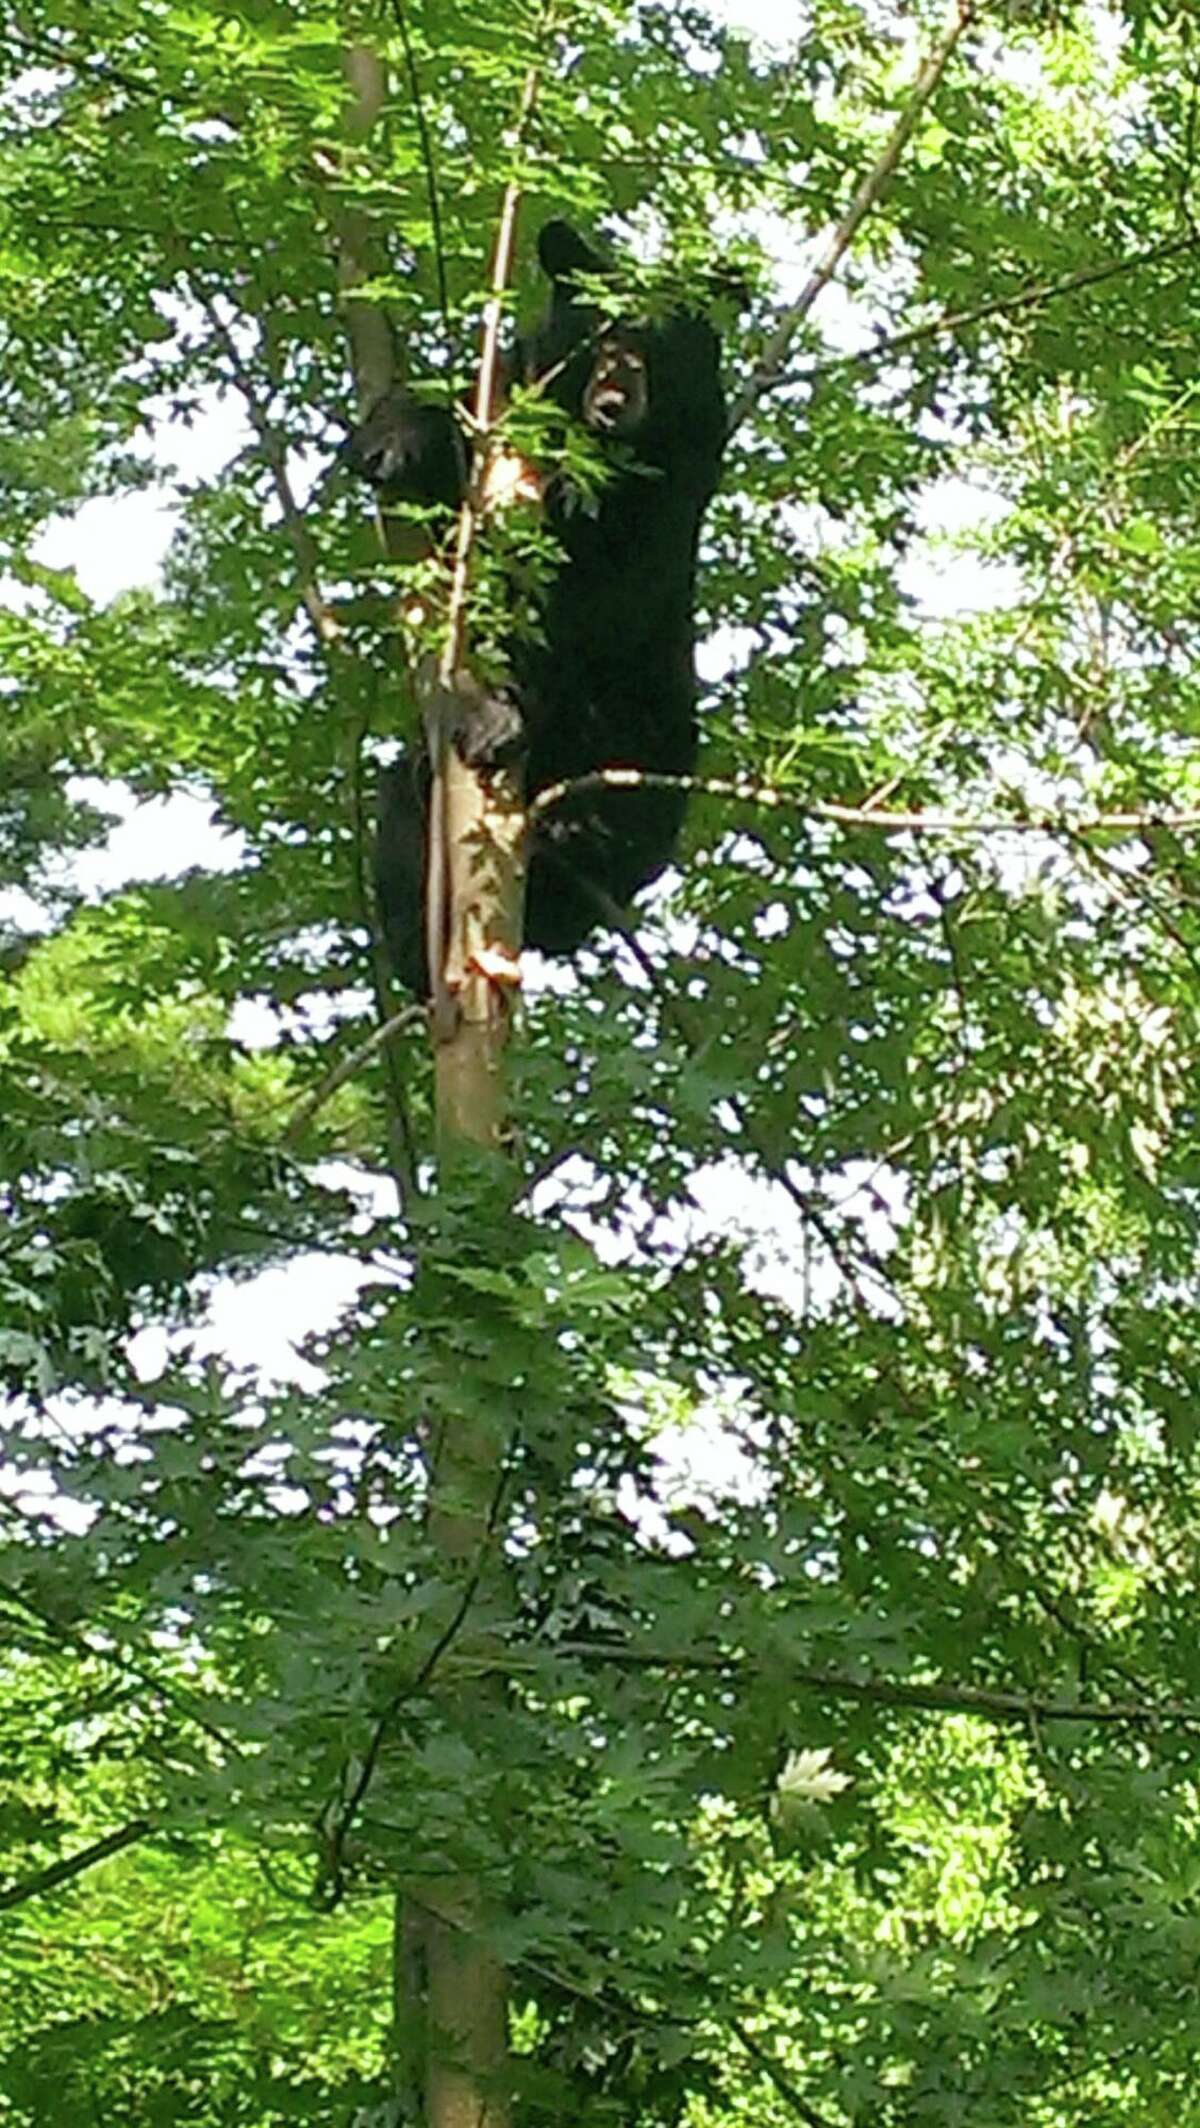 In this Sunday, July 5, 2015 photo provided by the Hartford Police Department, a black bear is up a tree in Hartford, Ct. The 250-pound male estimated to be about 3-and-a-half years old was spotted on Colebrook Street in the Blue Hills area at about 9:30 a.m. Sunday. The bear safely was tranquilized and relocated by state environmental officers. (Hartford Police Department via AP)